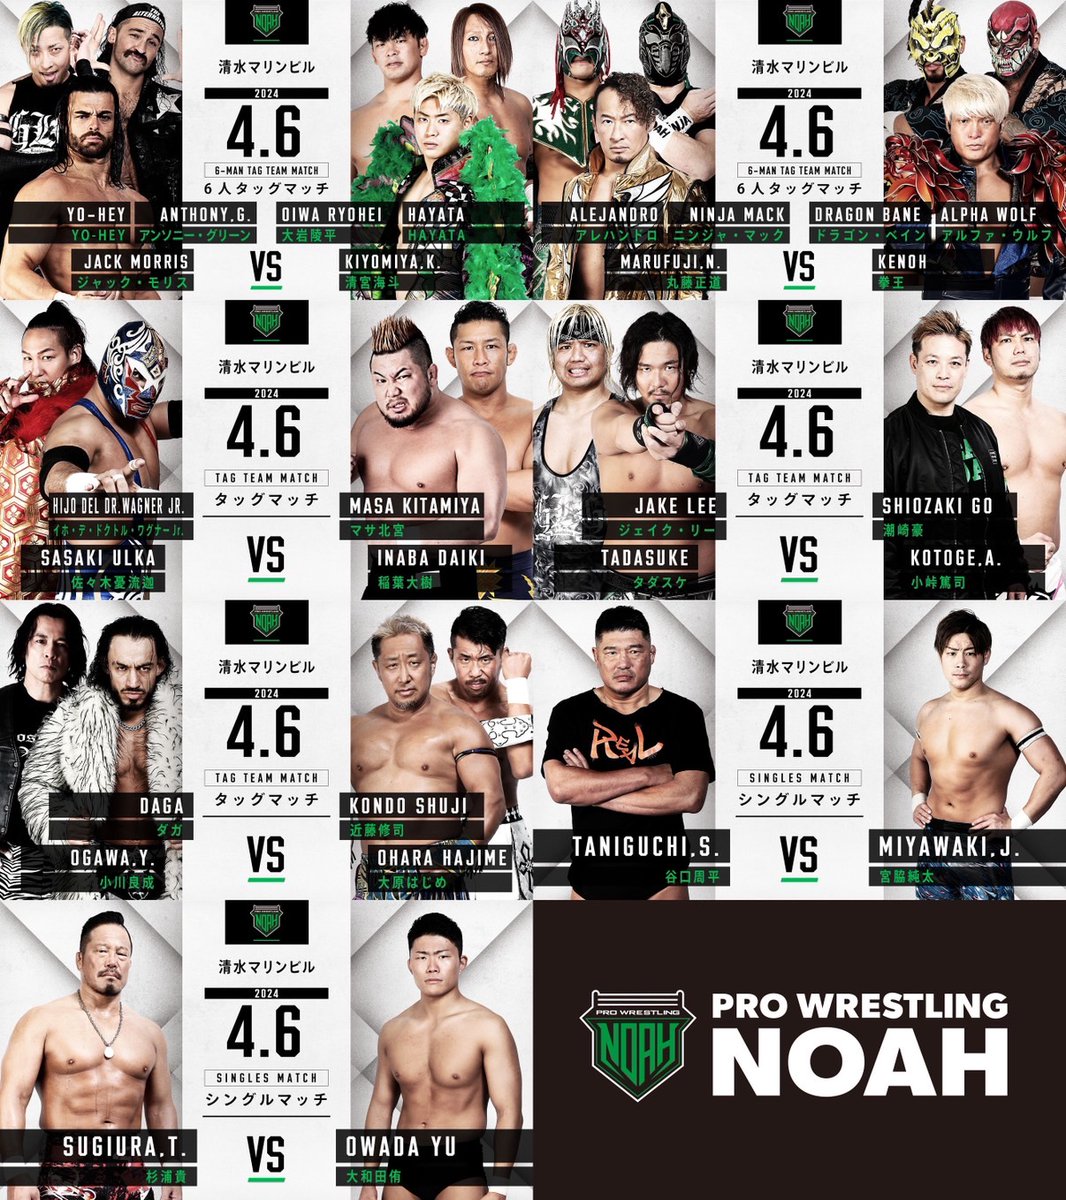 📣 UP NEXT: Sunny Voyage in Shimizu on Saturday, FULL CARD 🔥 📺 #wrestleUNIVERSE VOD to follow #noah_ghc